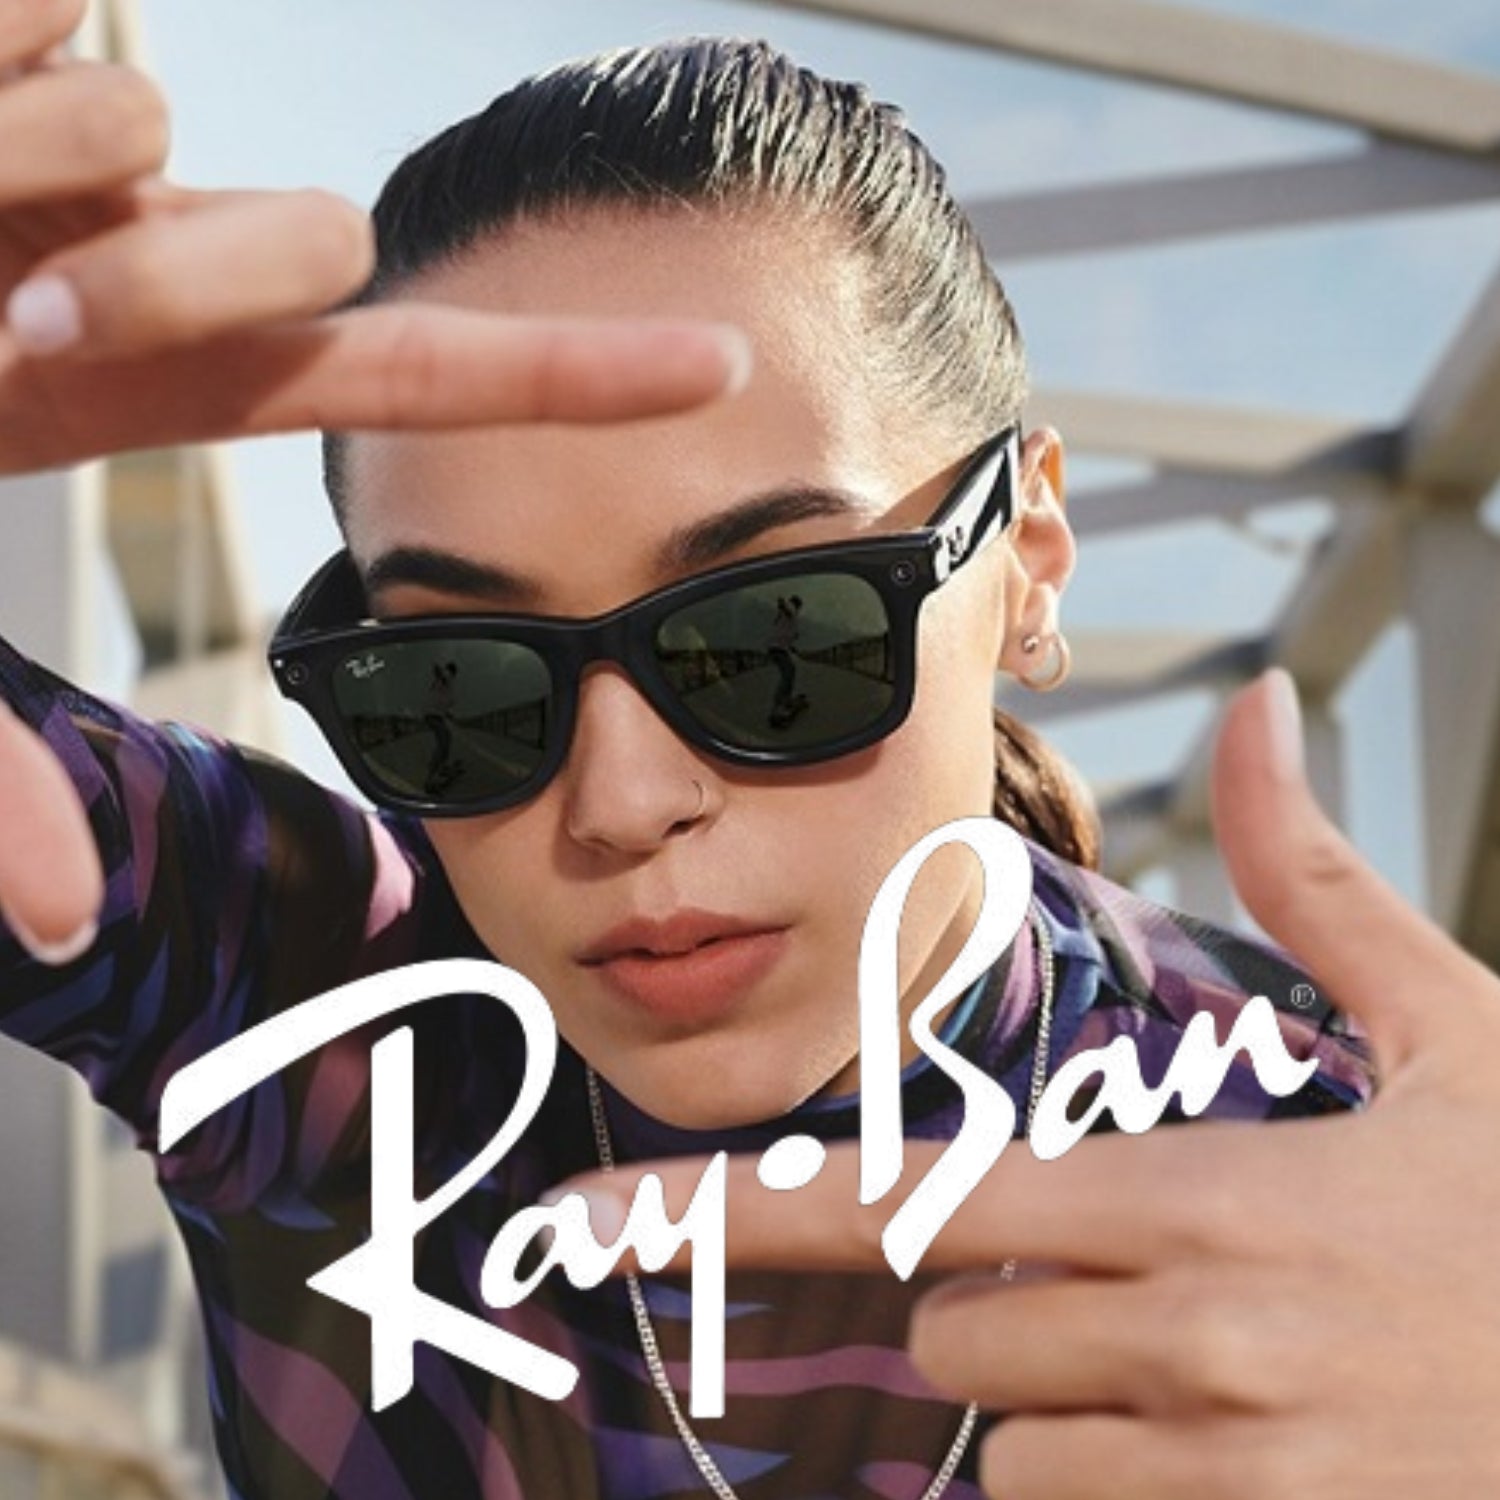 "Optorium: Ray-Ban sunglasses for men and women. Stylish eyewear from a trusted brand."